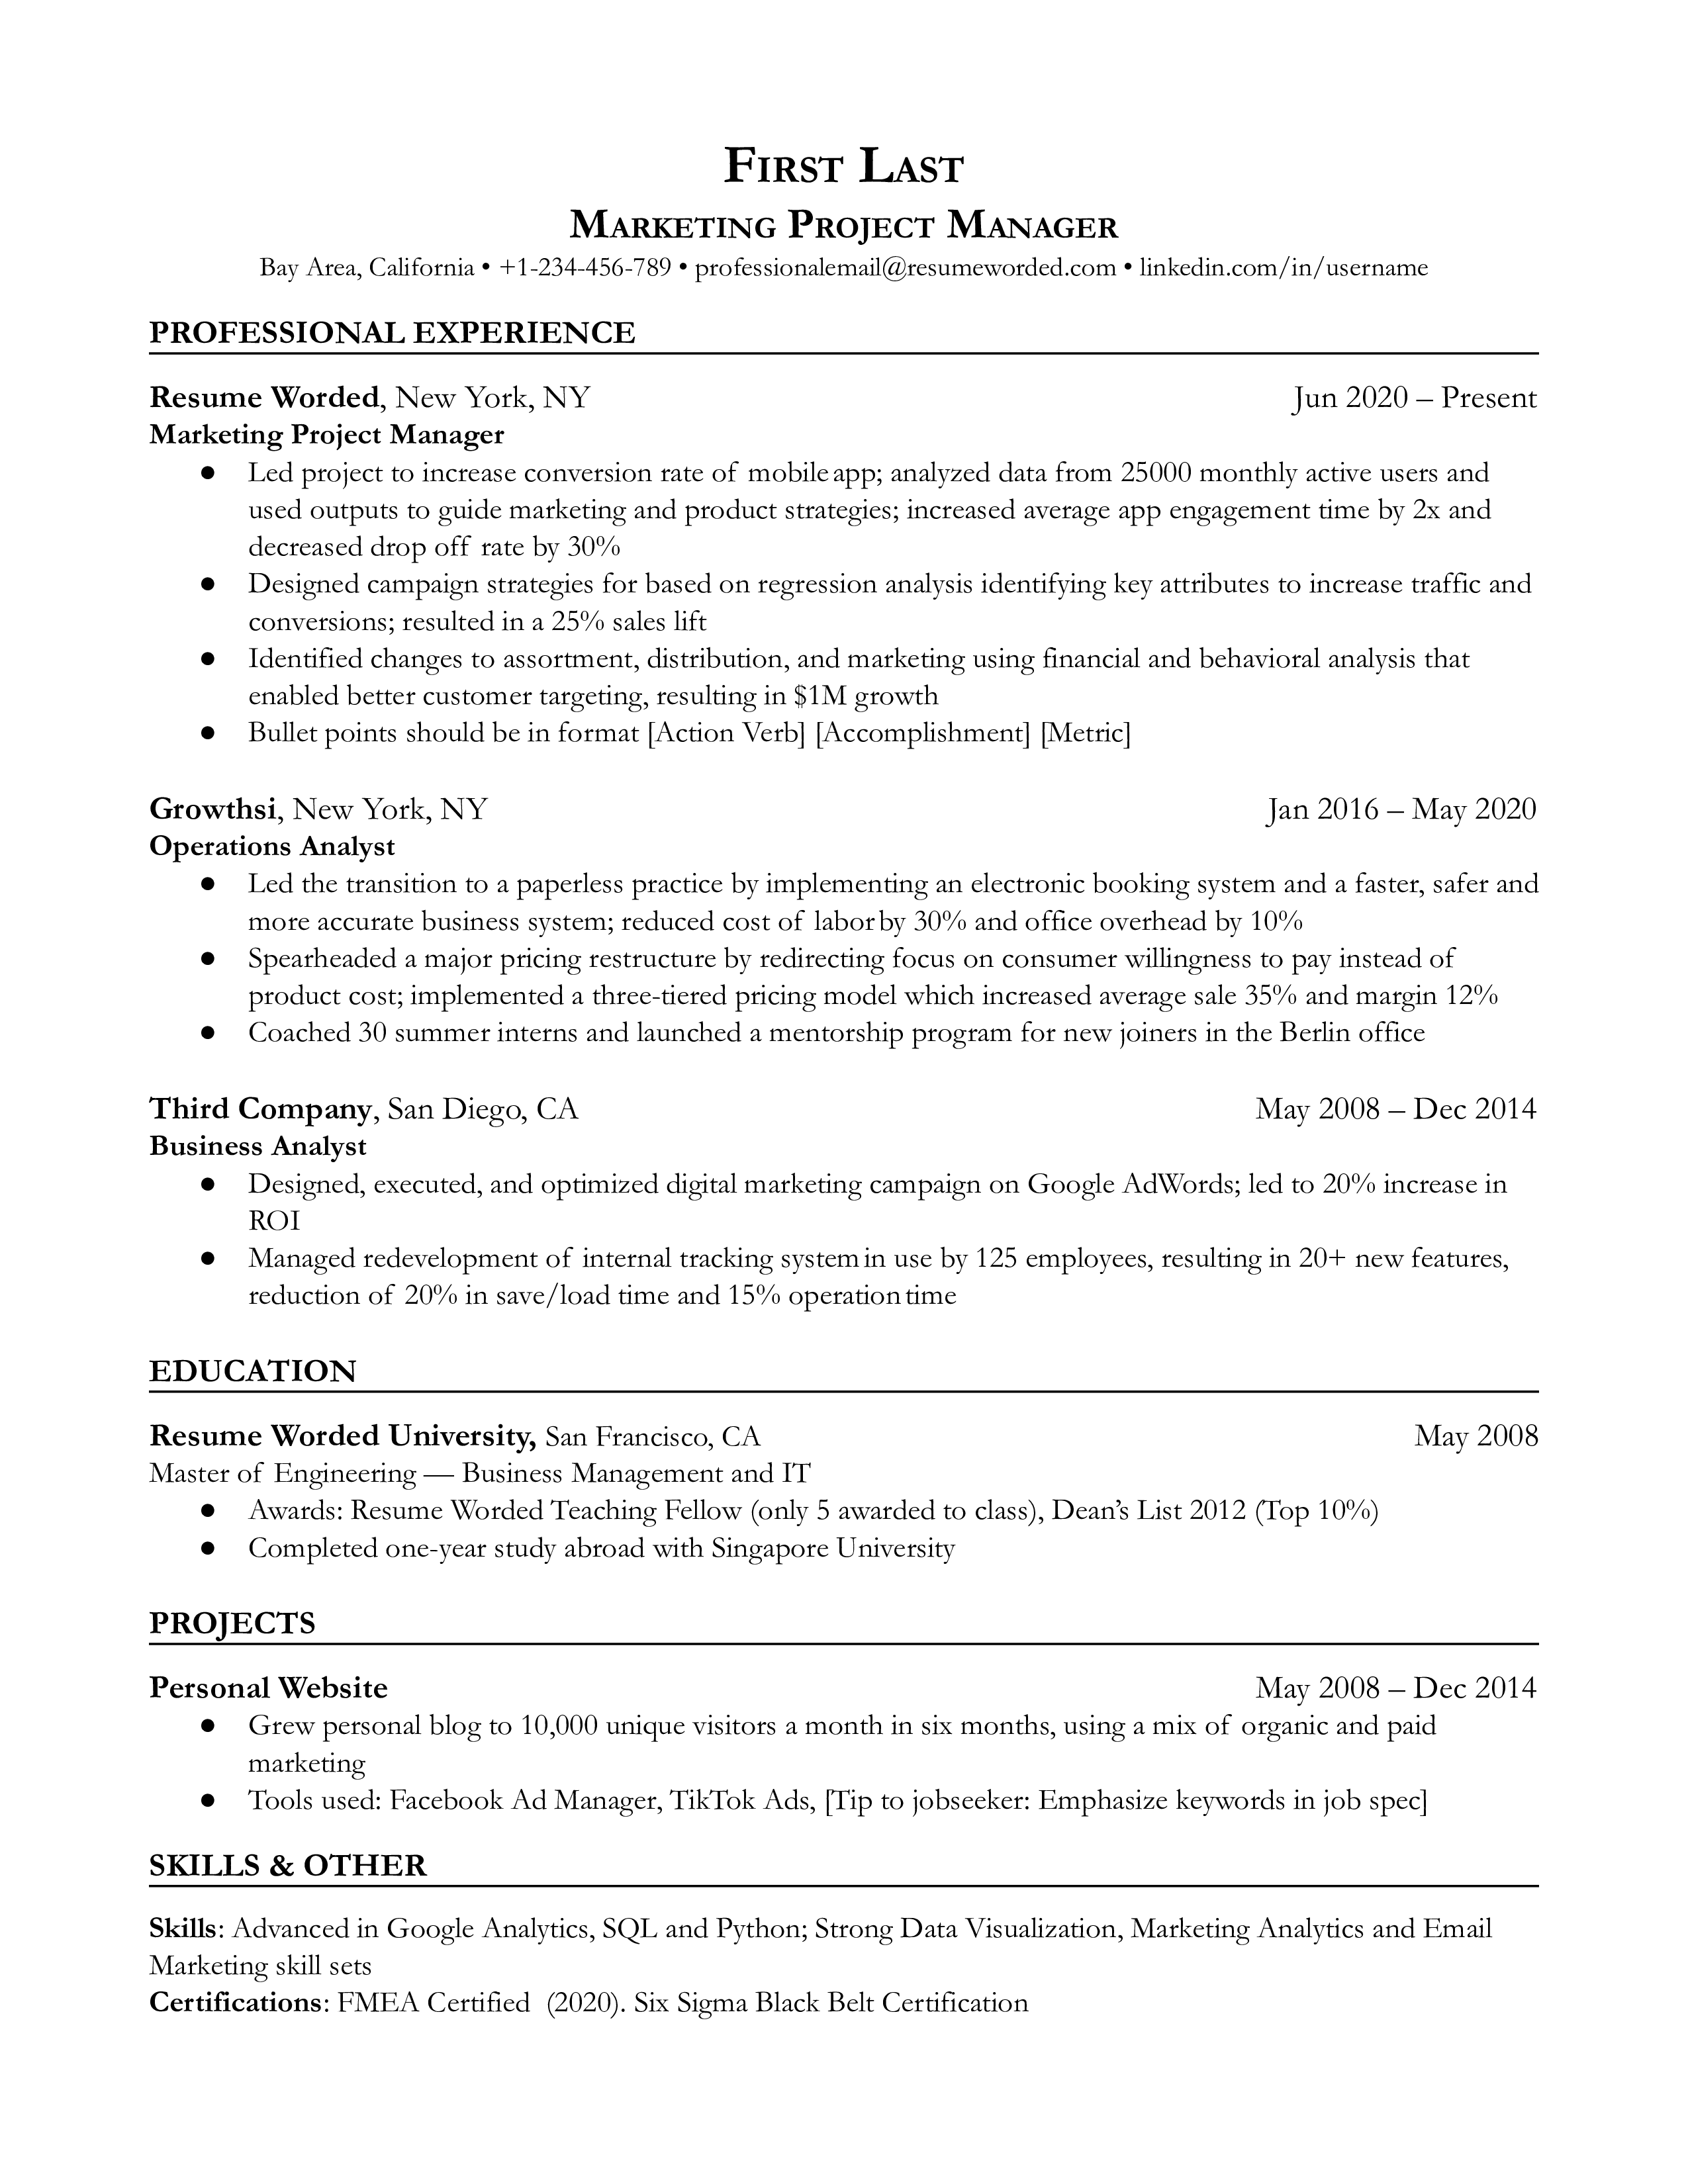 Marketing project manager resume with bullet points, action verbs, skills, education, and projects